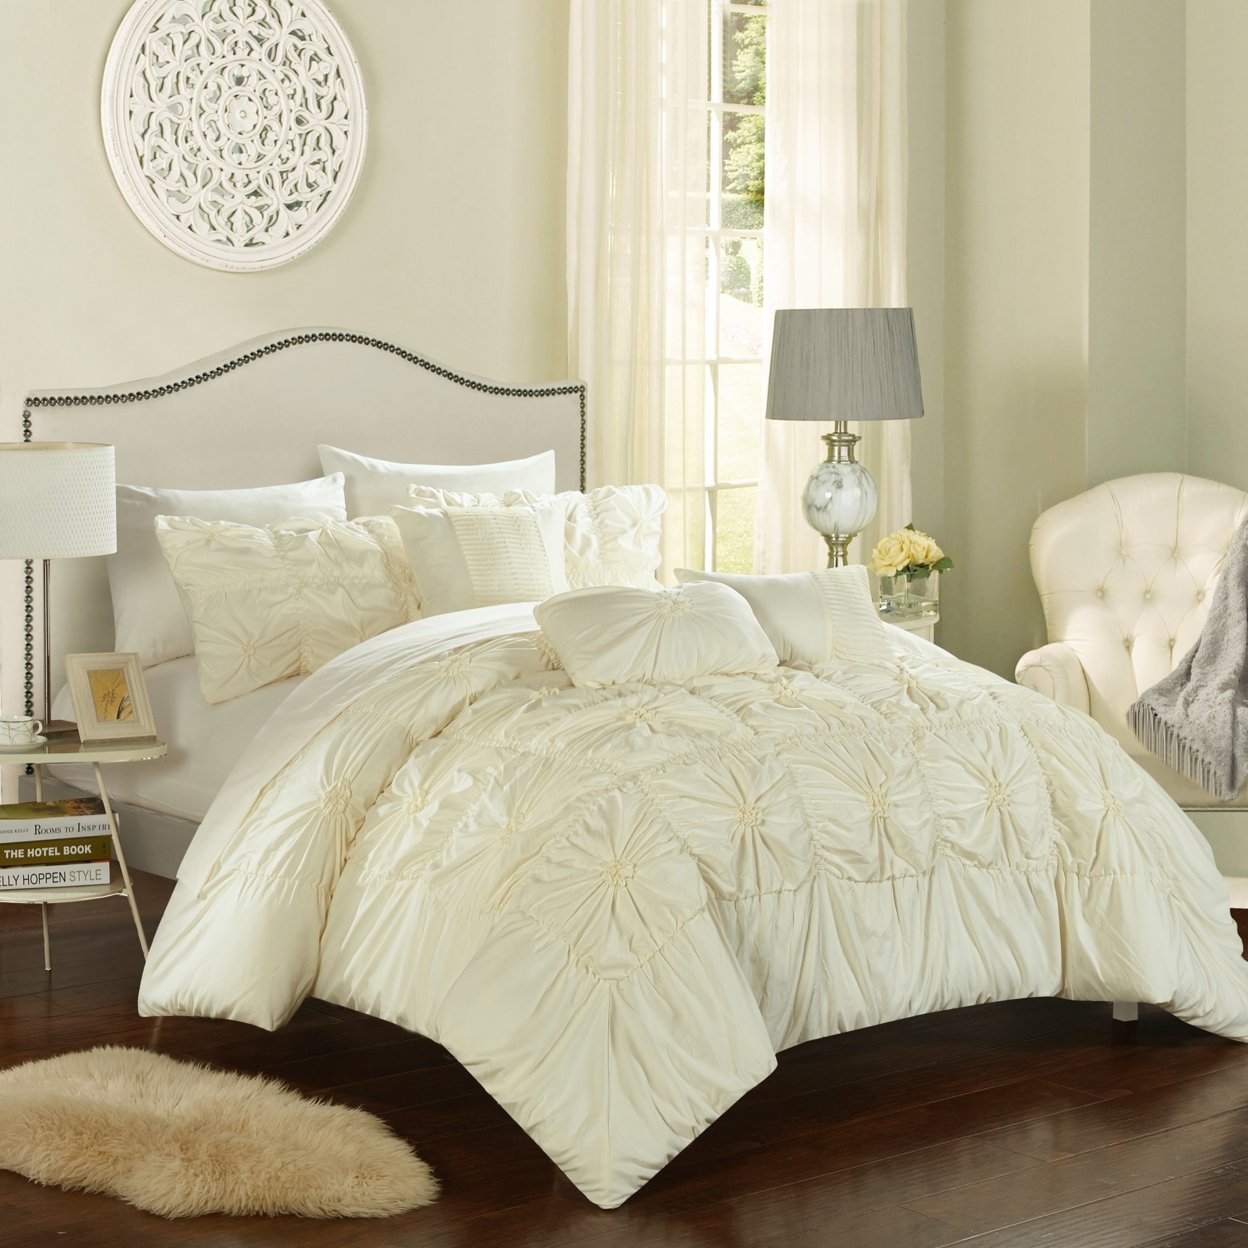 Chic Home 8/10 Piece Sheffield Floral Pinch Pleat Ruffled Designer Embellished Bed In A Bag Comforter Set With Sheet Set - Beige, Queen